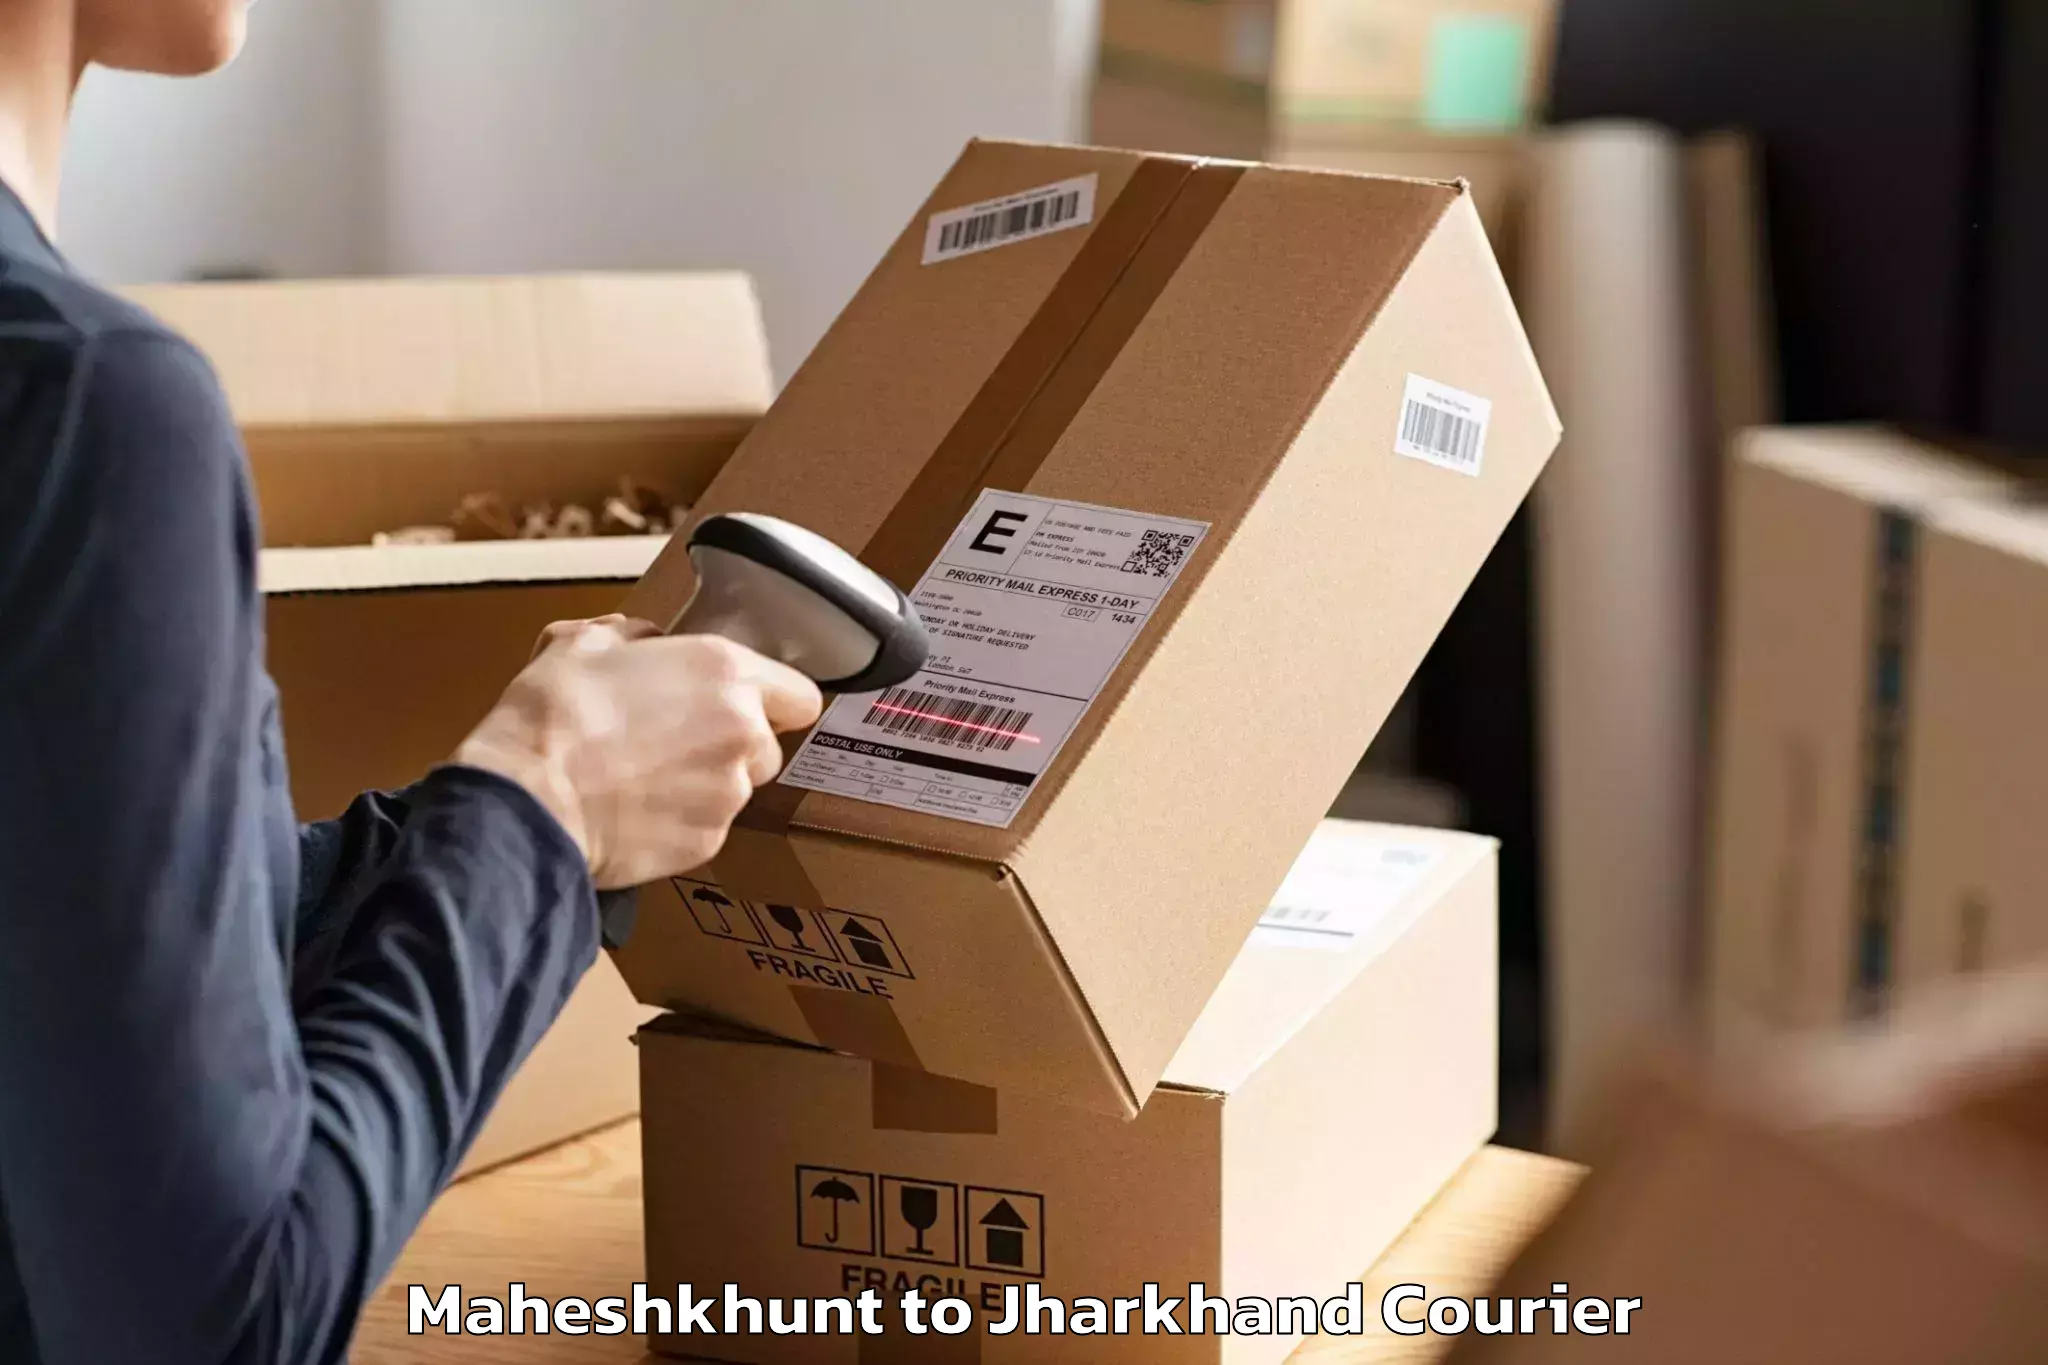 Moving and packing experts Maheshkhunt to IIT Dhanbad